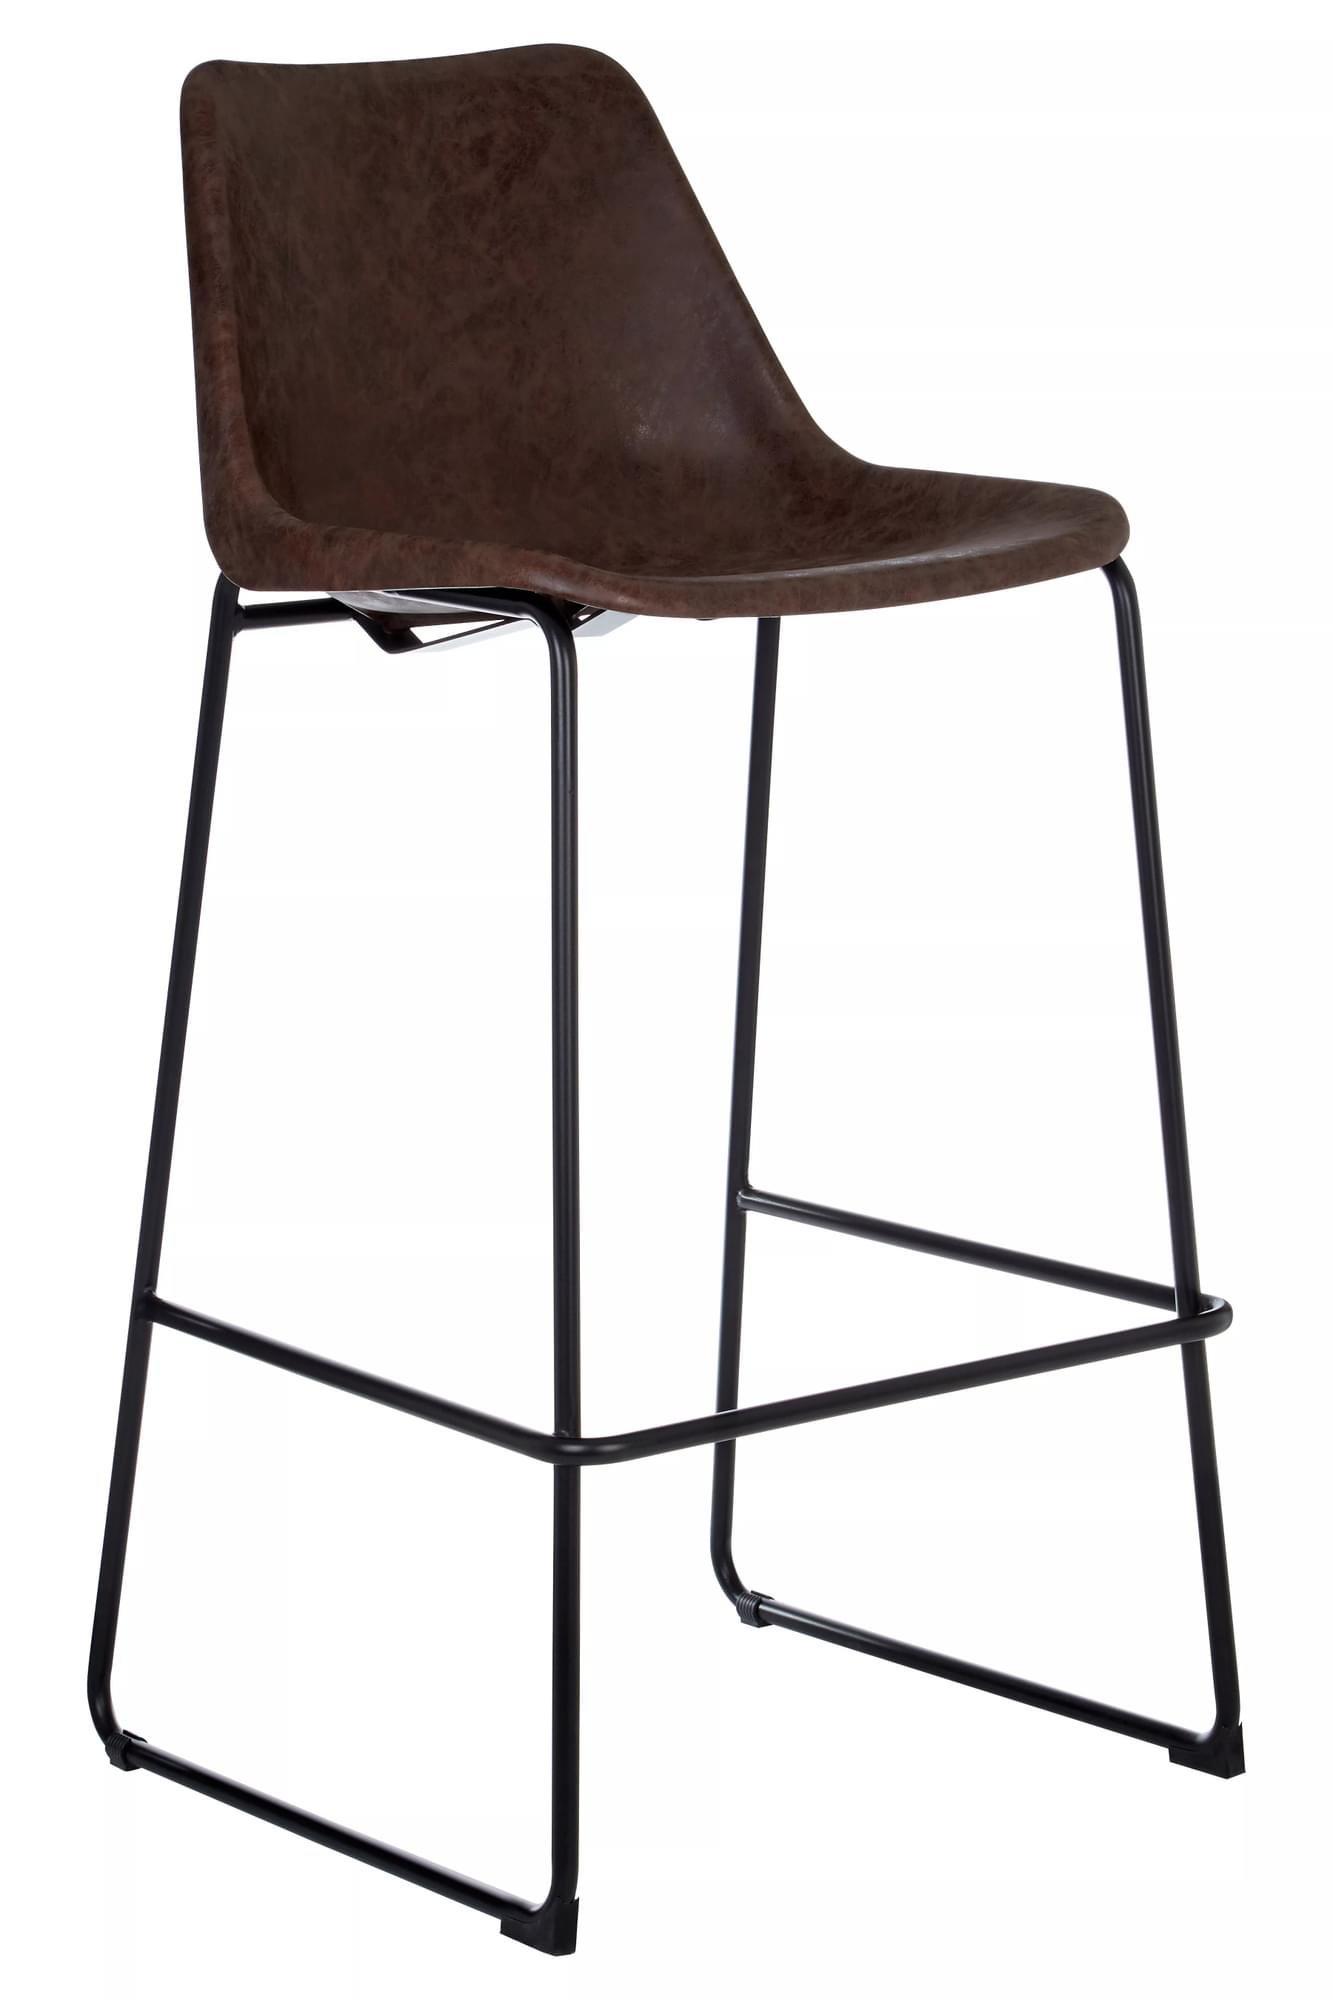 Interiors by Premier Dalston Bar Stool with Angled Legs